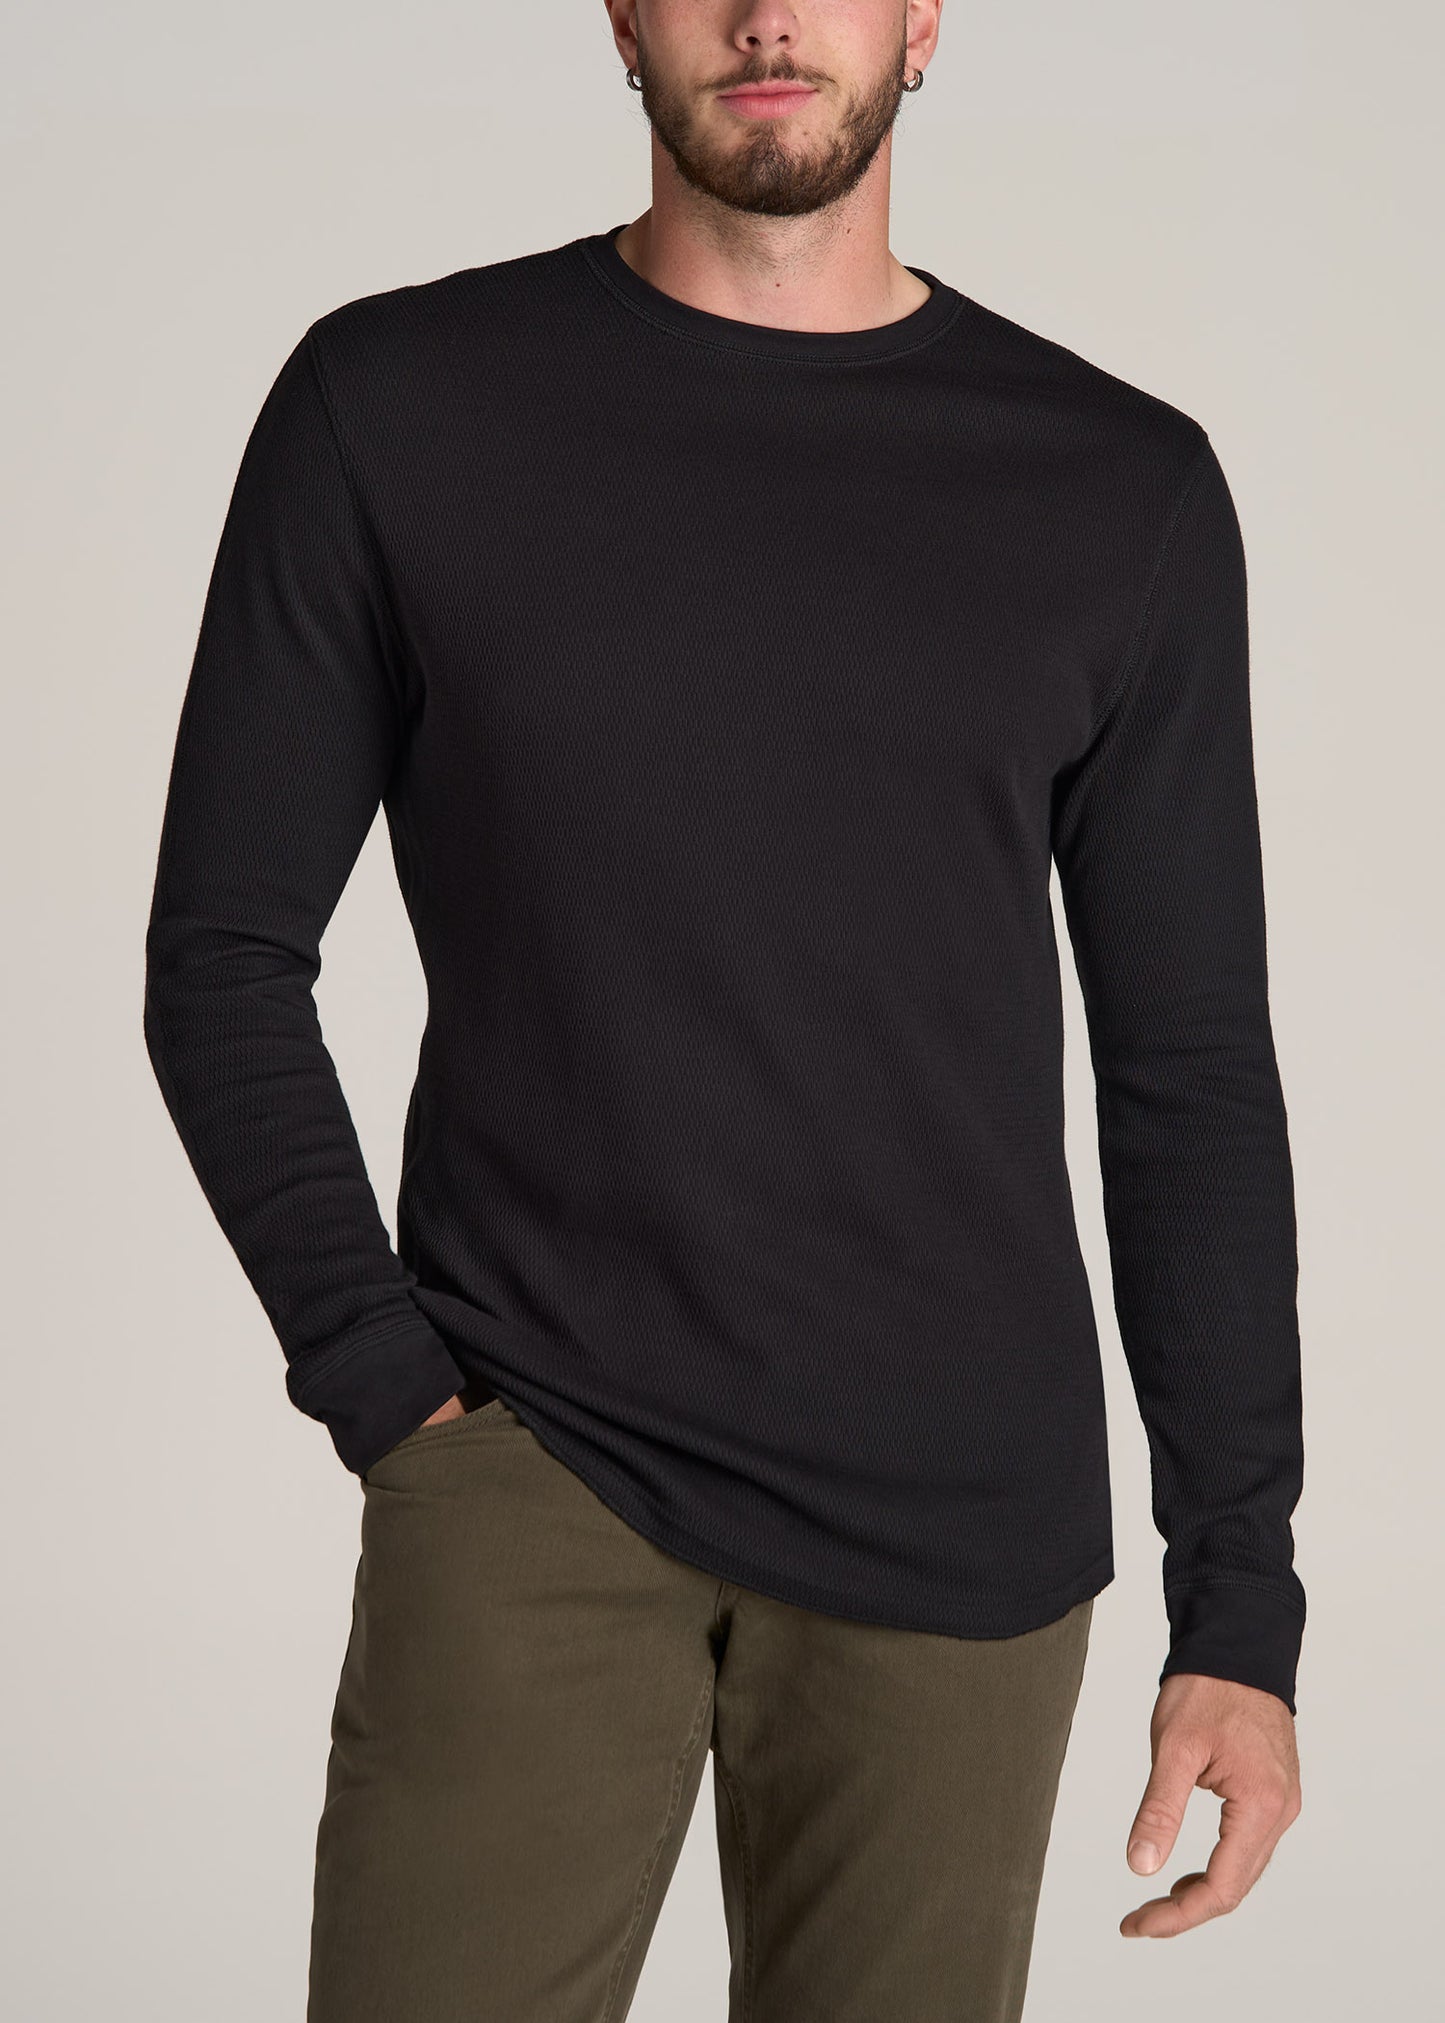 Double Honeycomb Thermal Crewneck Extra-Long Top in Black